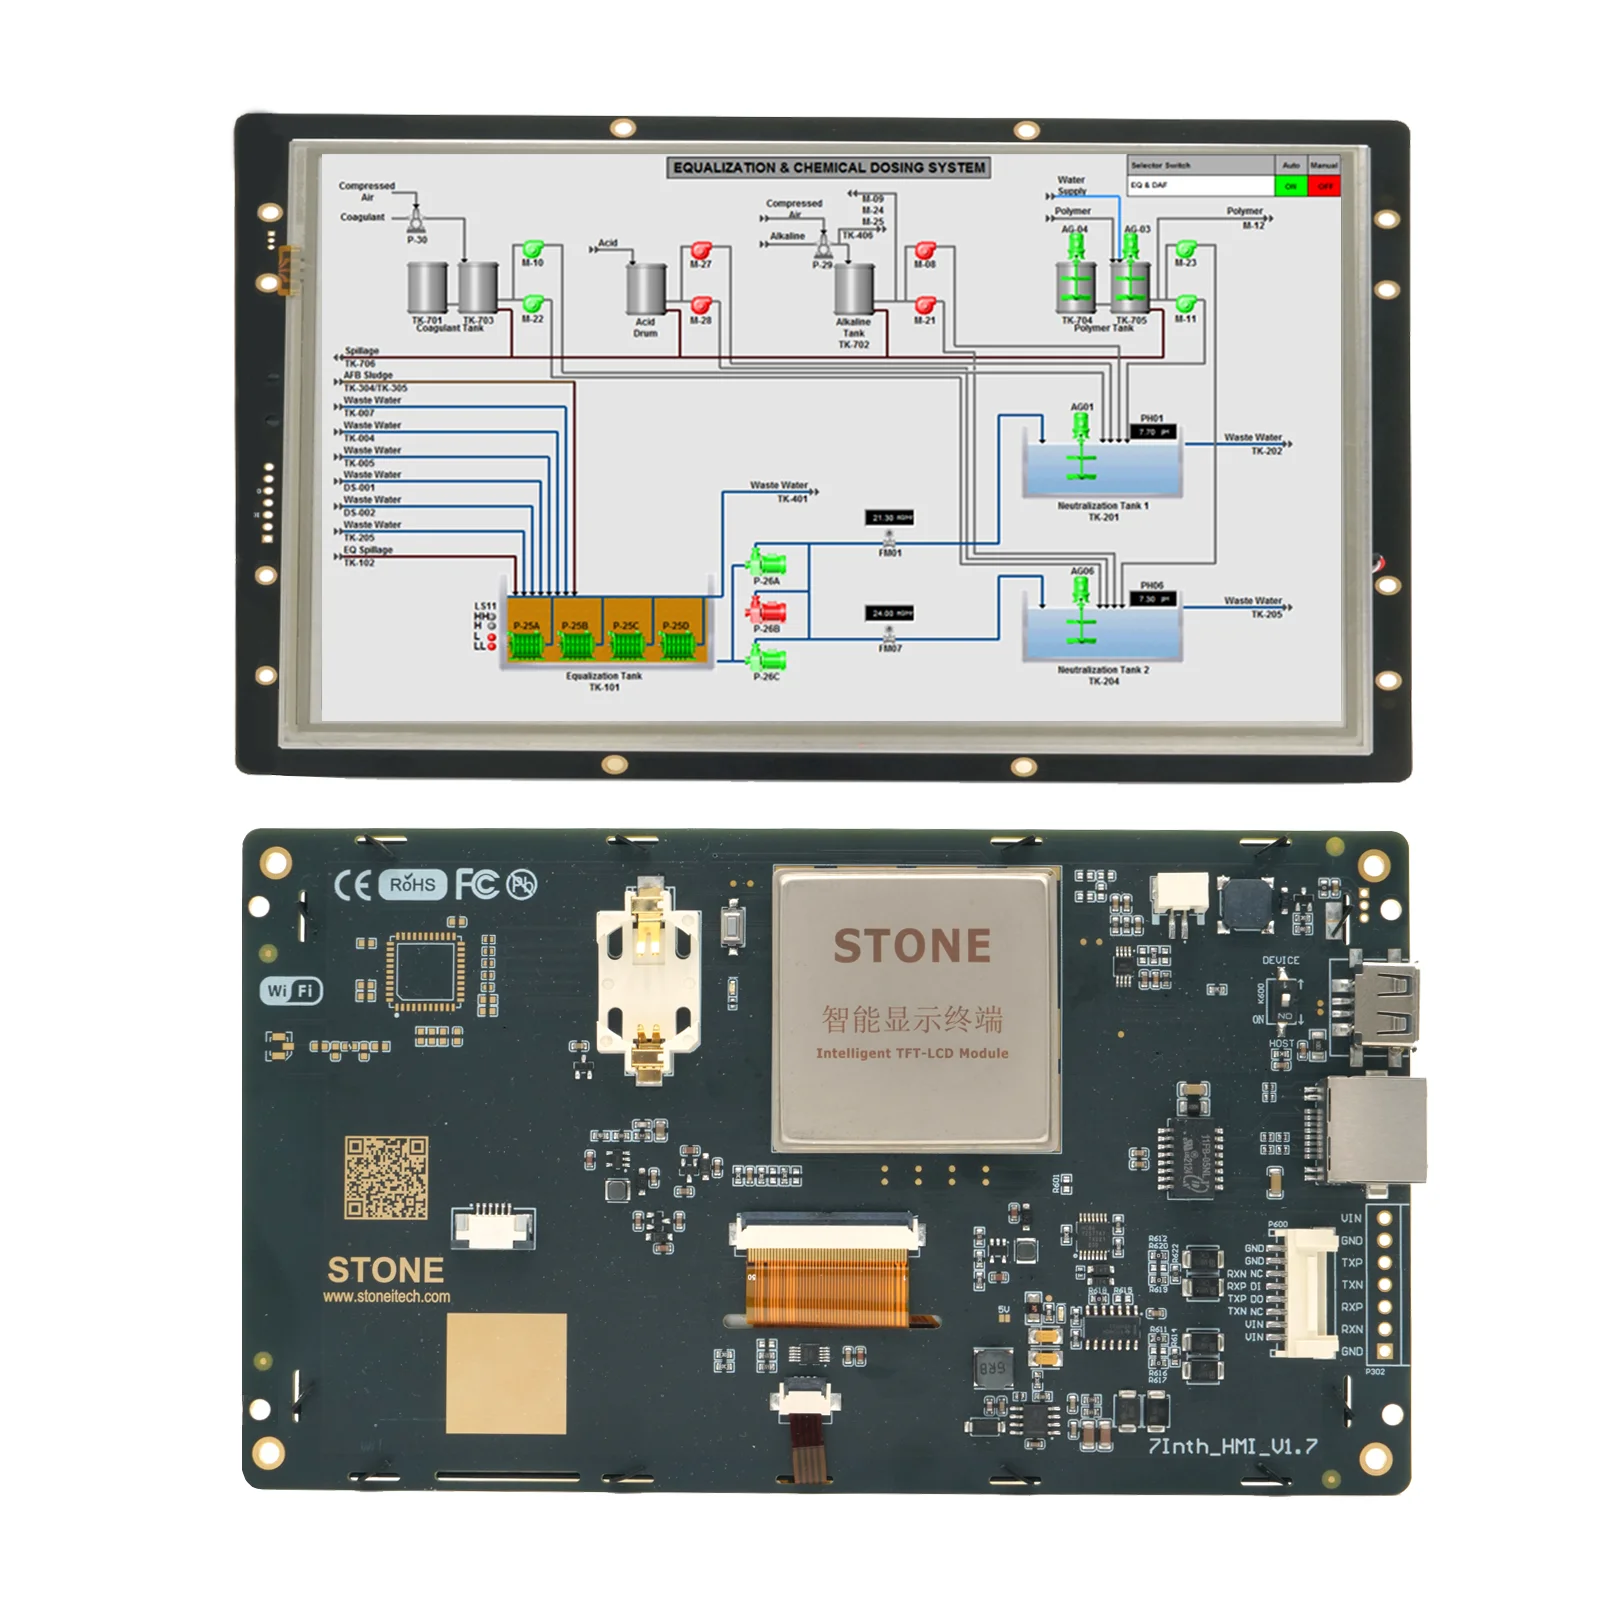 STONE 3.5 to 10.4 Inch Industrial HMI Touch Display Module Controlled by Simple Commands through UART port